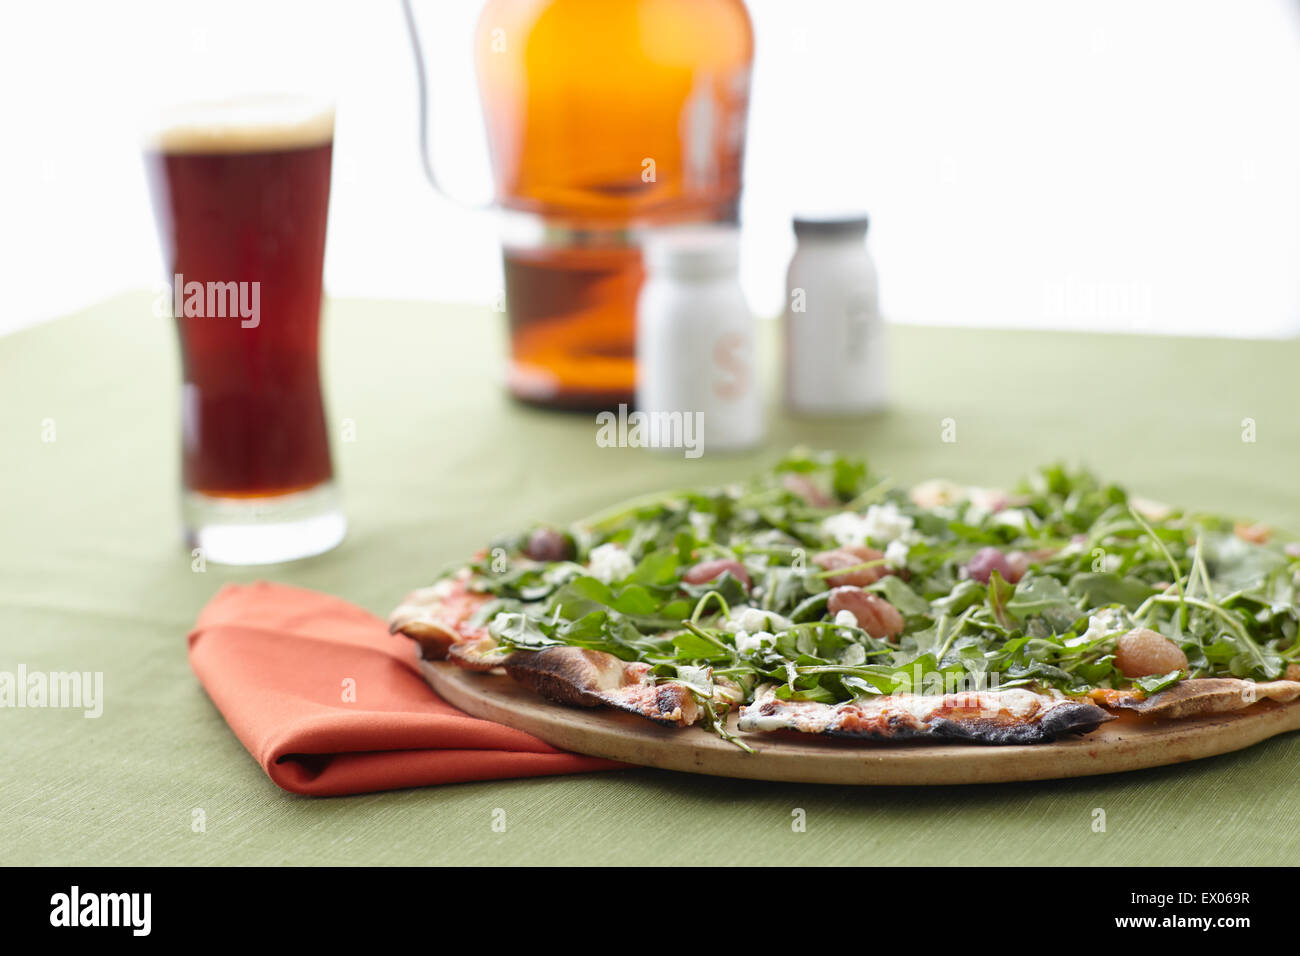 Still life of cheese and rocket pizza Stock Photo